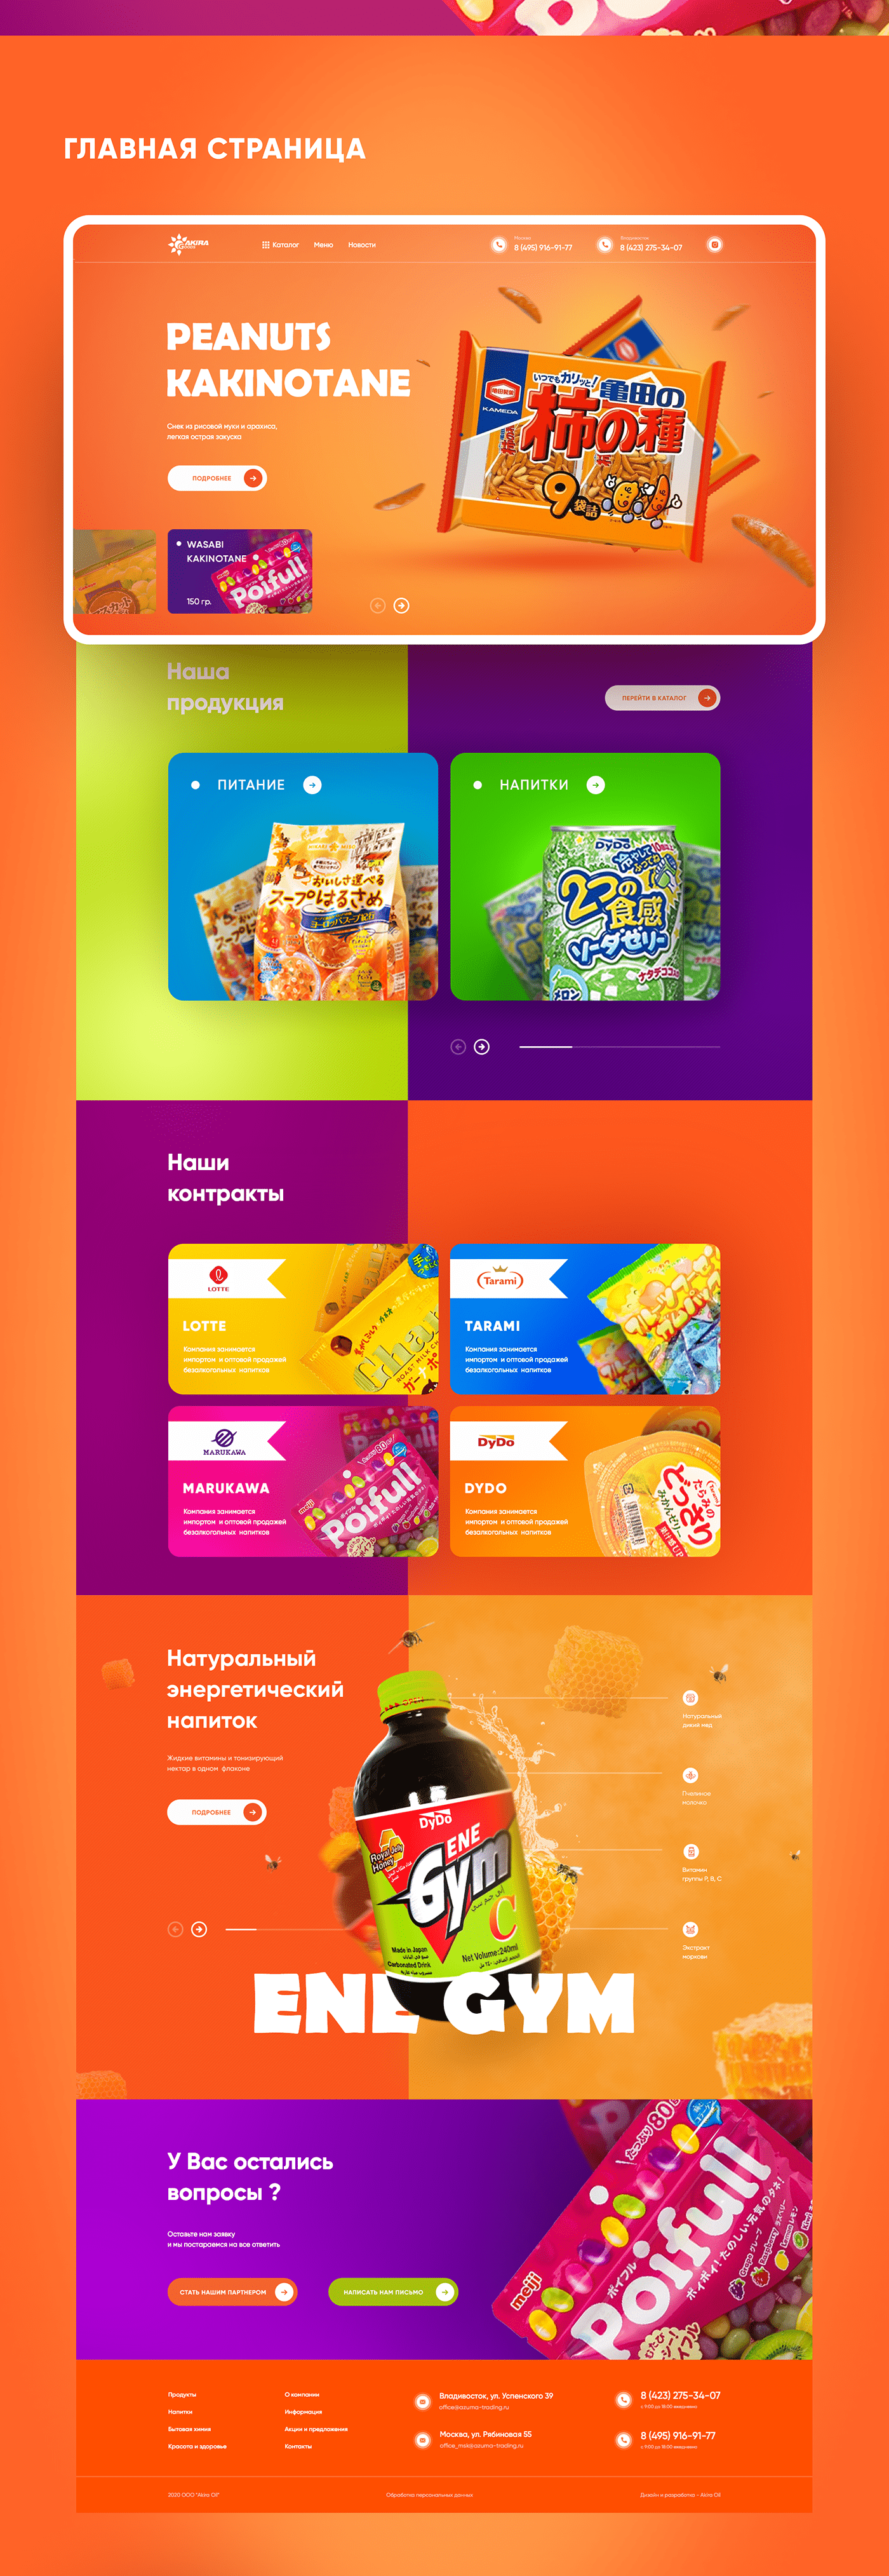 colors corporate website design inspiration webdesign japanese product landing page Online shop orange fiolett yellow promo site snacks and candy webdesign trends